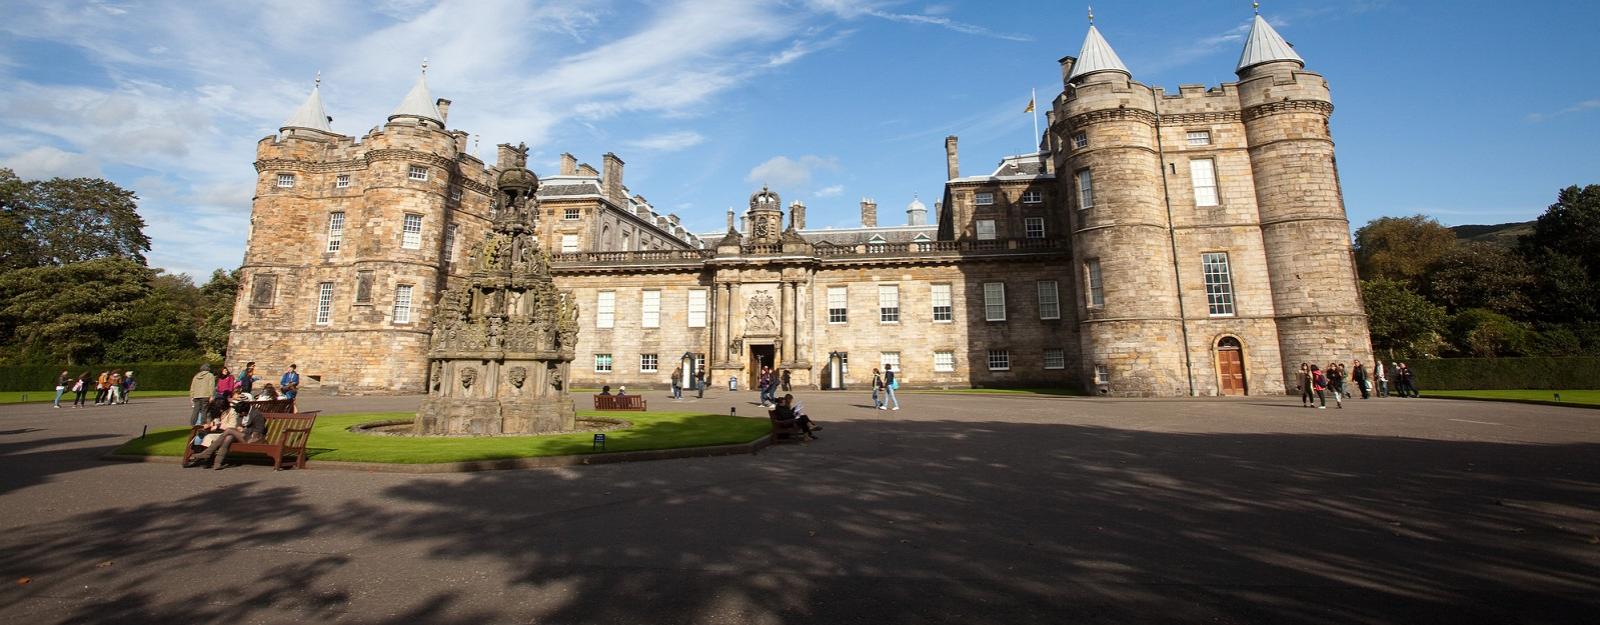 The Palace of Holyroodhouse in Edinburgh